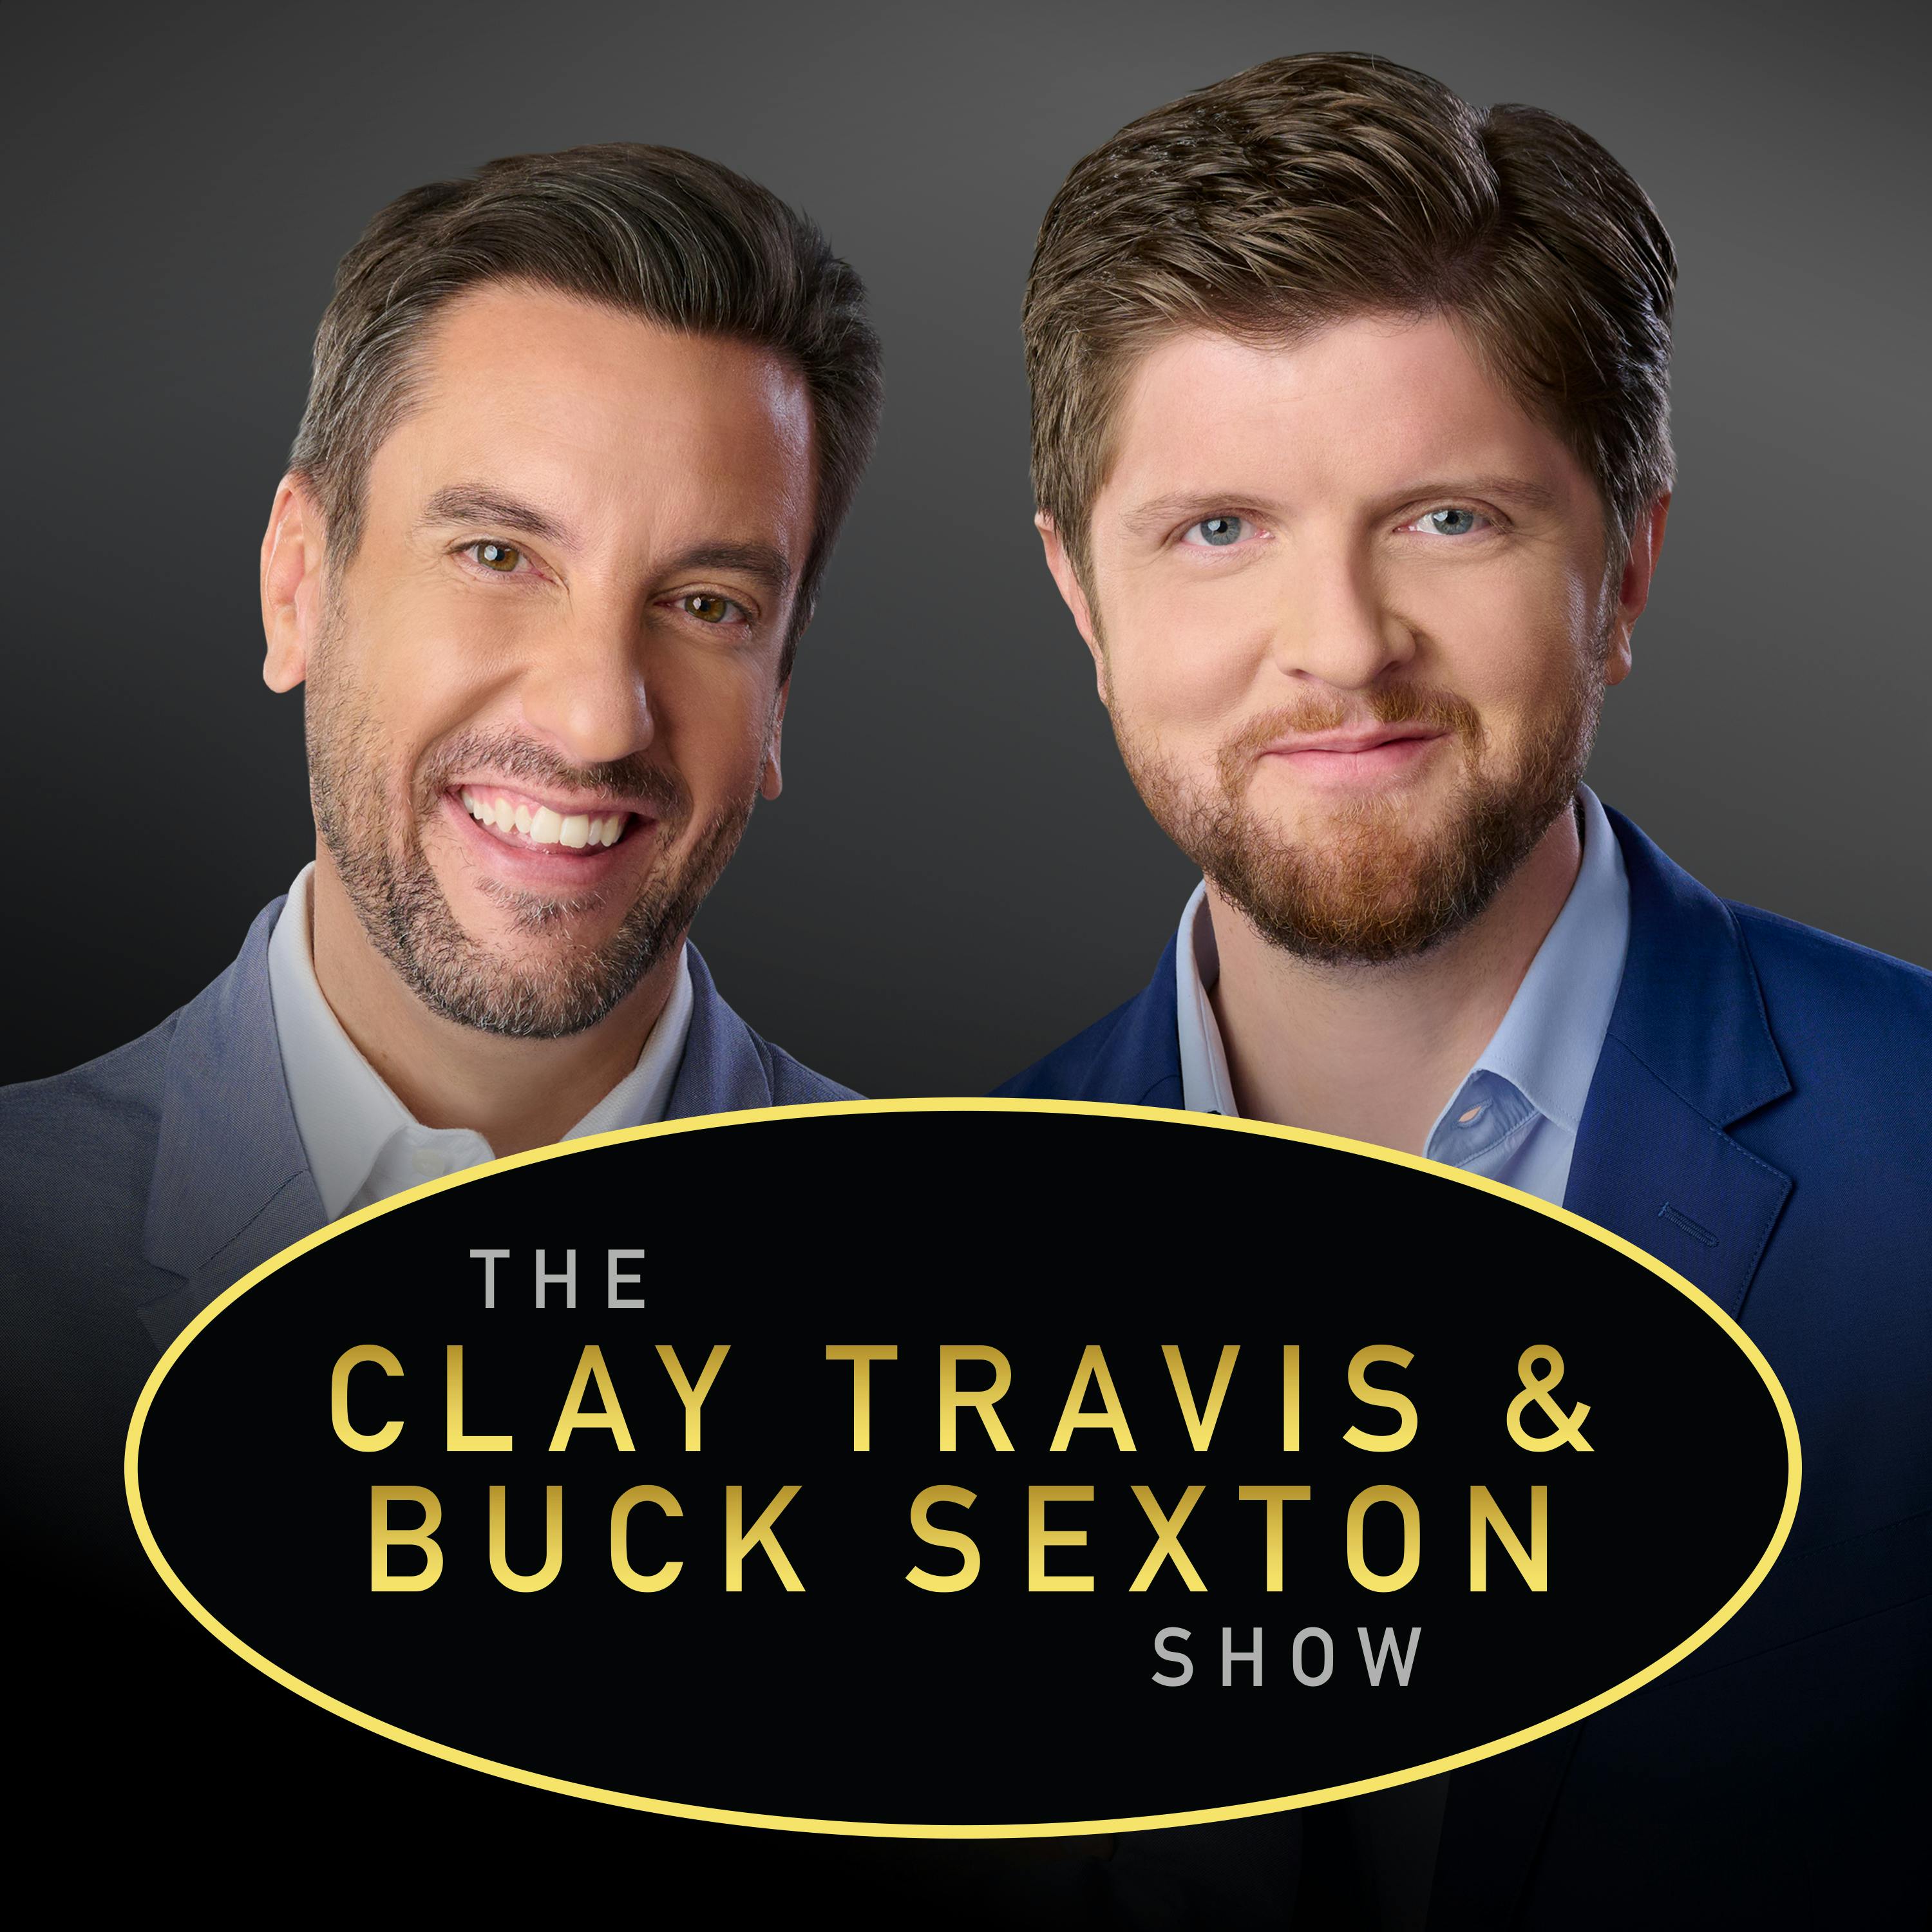 Clay Travis and Buck Sexton Show H1 – Dec 1 2021